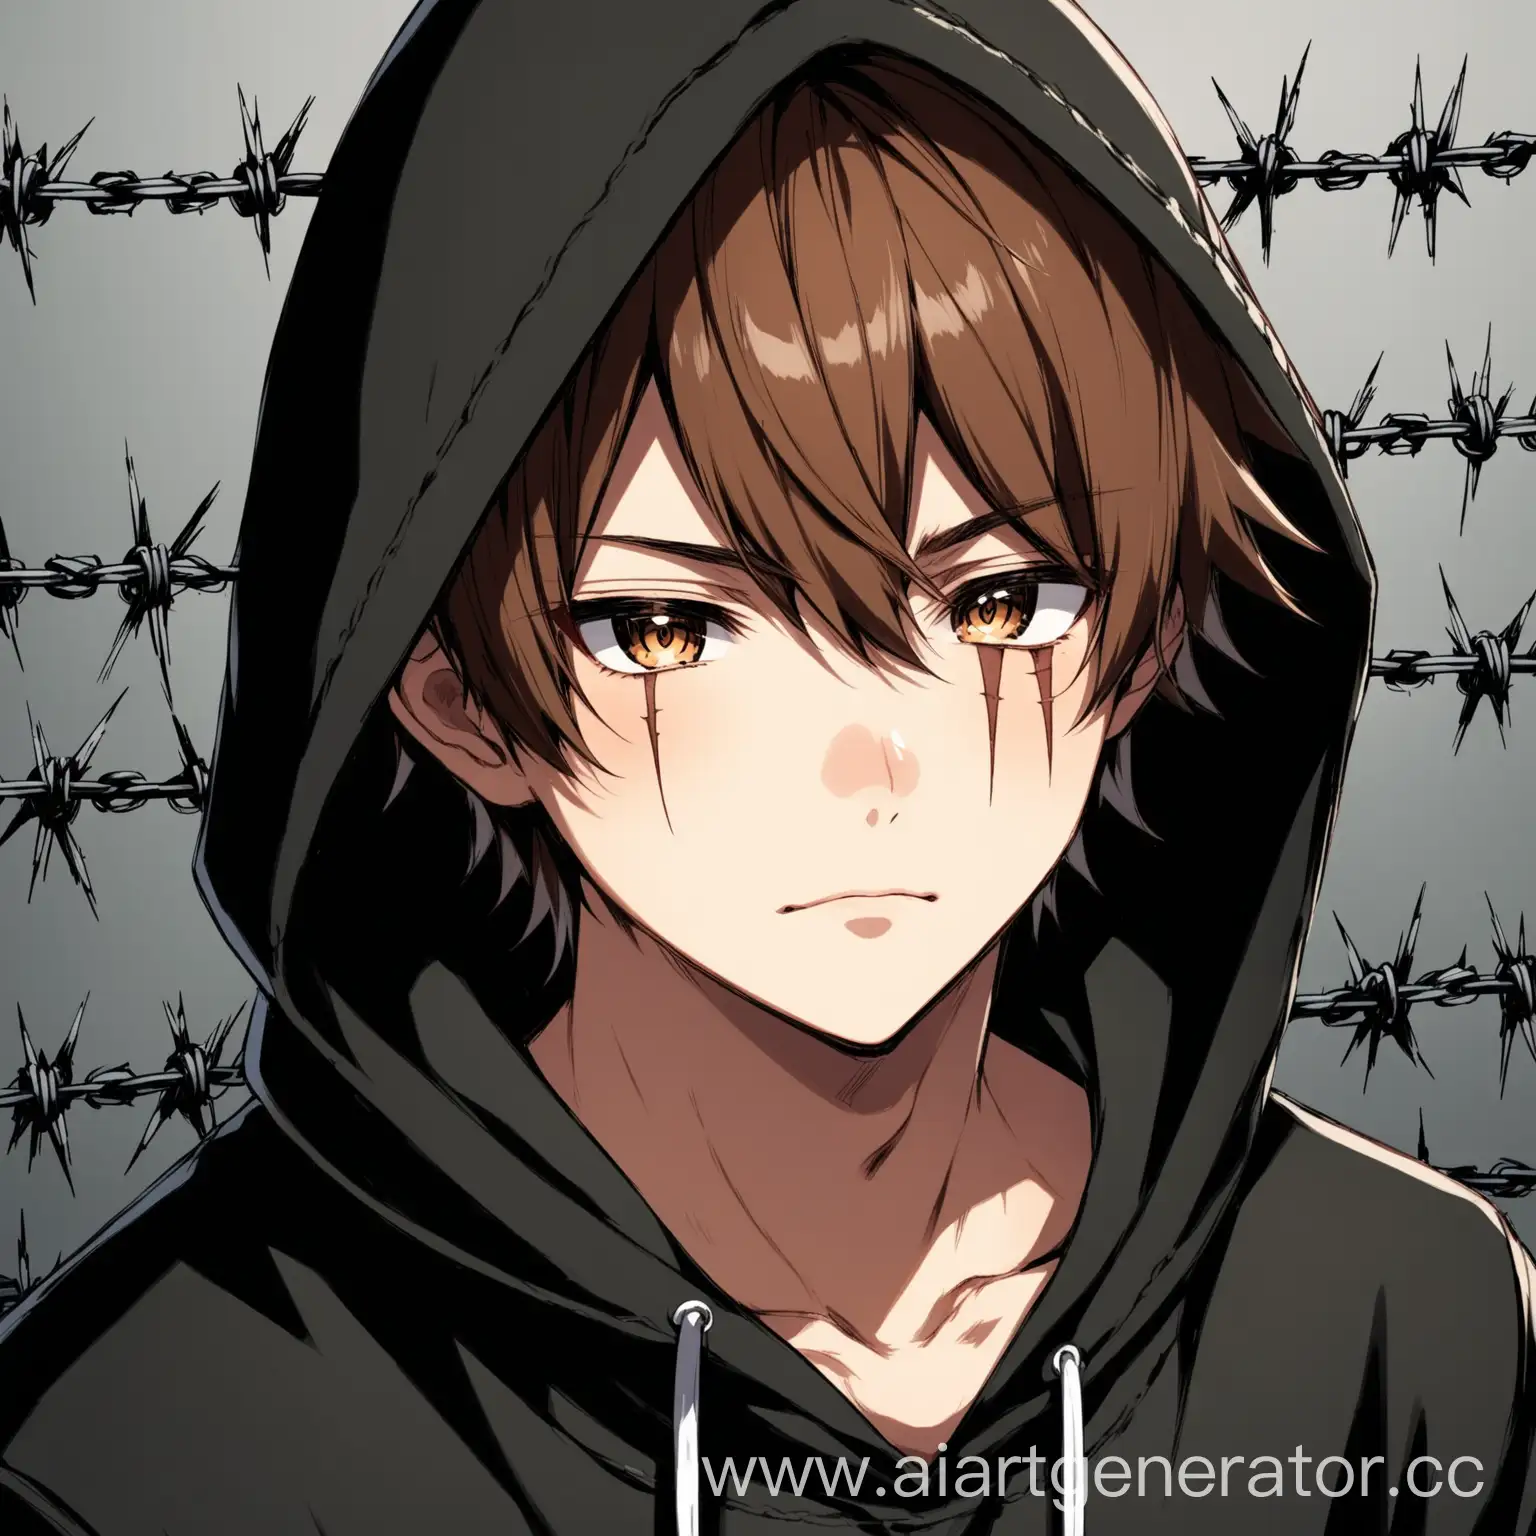 Anime-Boy-with-Brown-Hair-in-Black-Hoodie-and-Scar-Looking-at-Camera